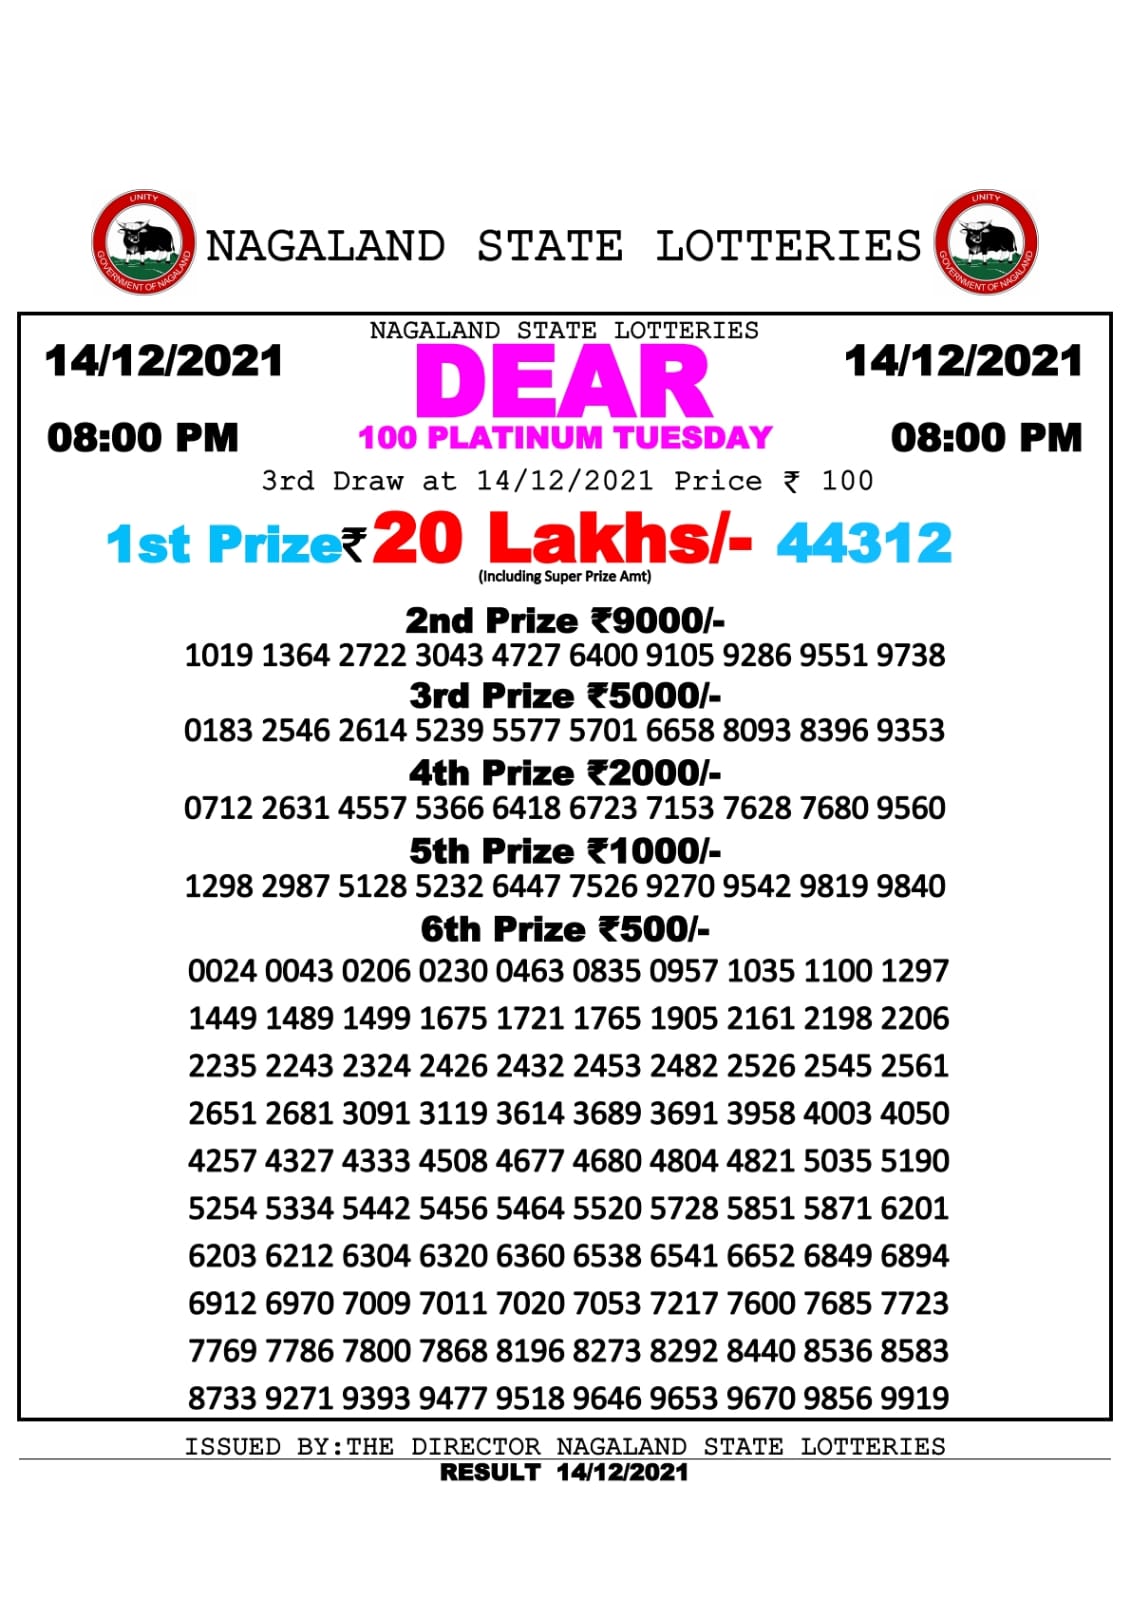 NAGALLAND STATE DEAR 100 WEEKLY LOTTERY 8 pm 14.12.2021